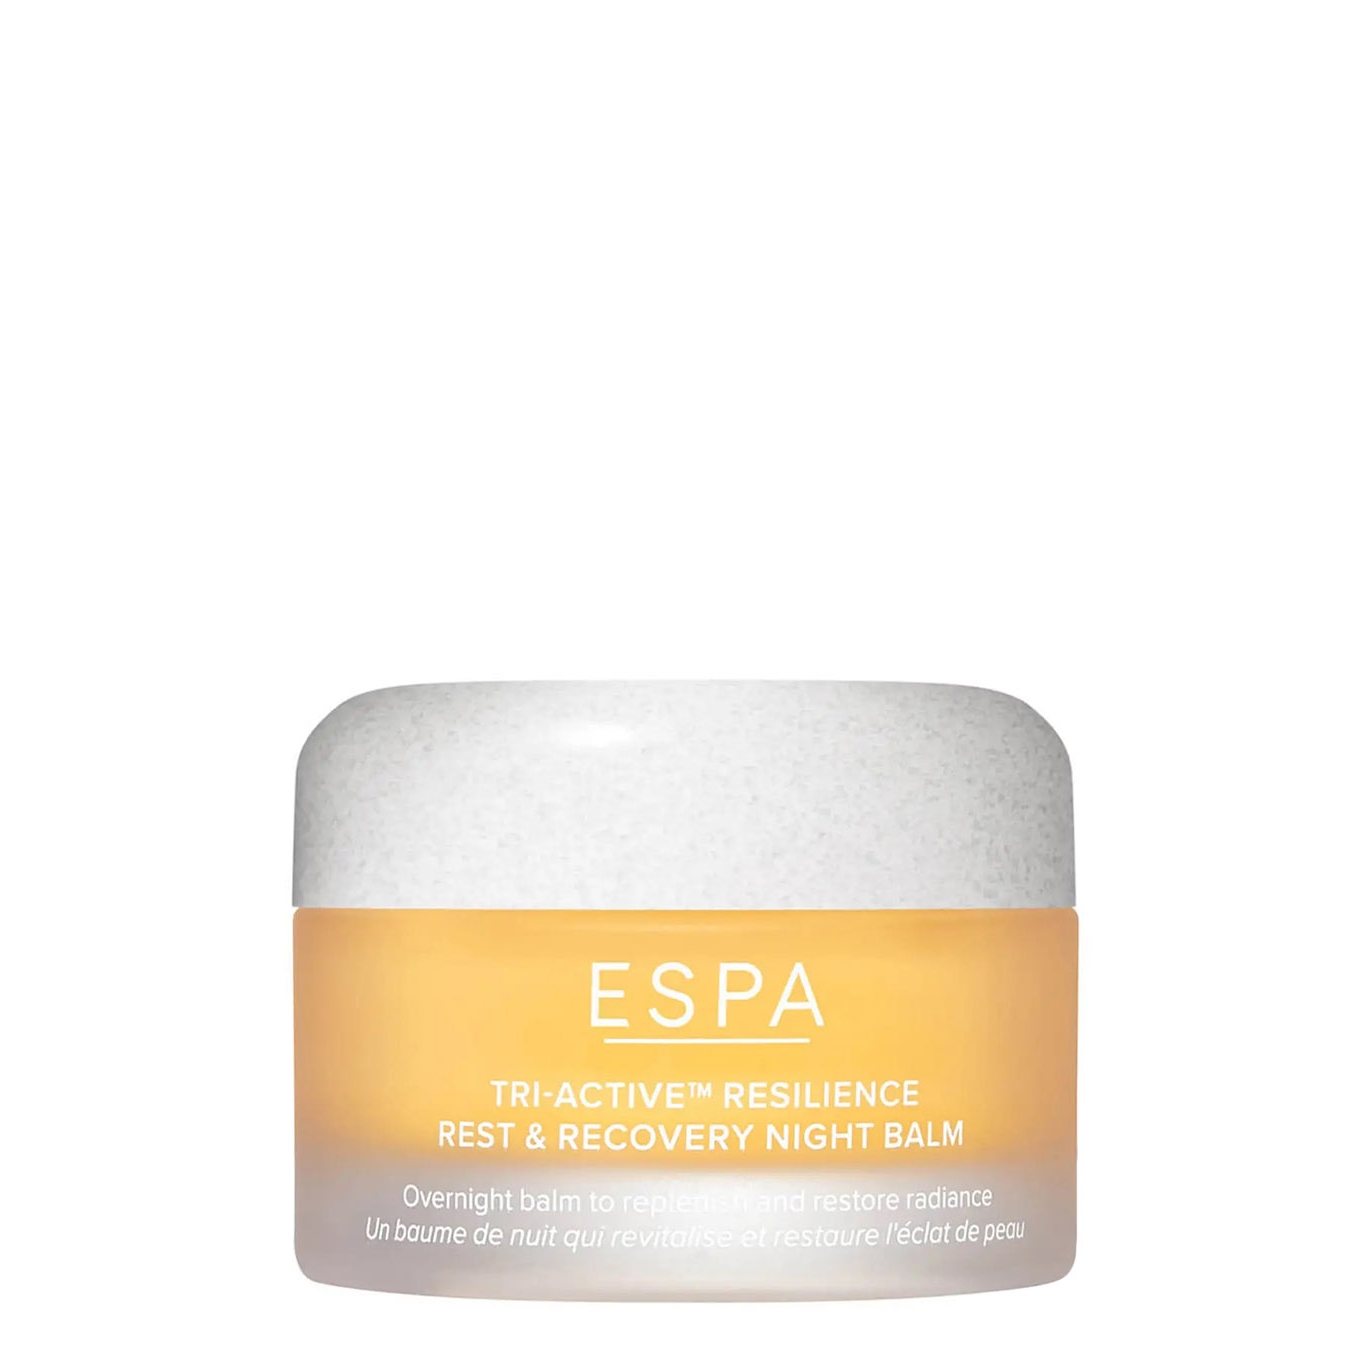 Espa Tri-active Resilience Rest And Recovery Night Balm 30ml In White